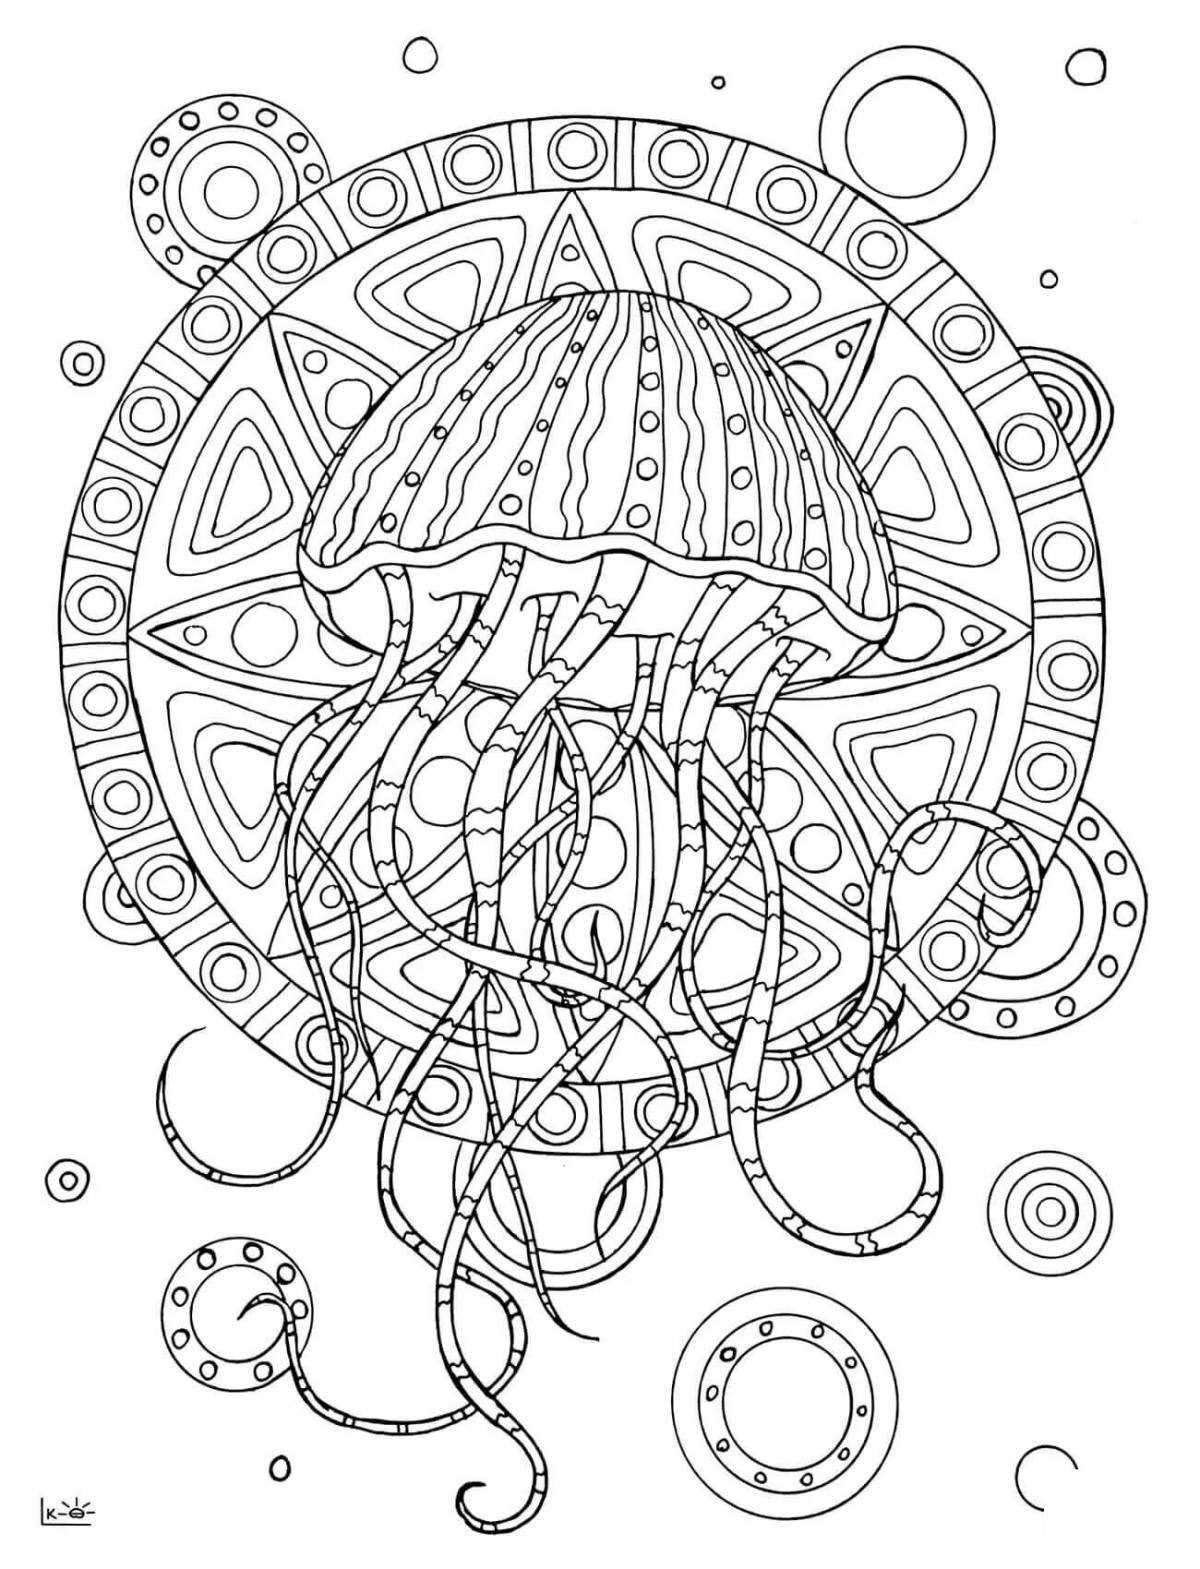 A fascinating coloring book sea therapy antistress for adults polbennikova